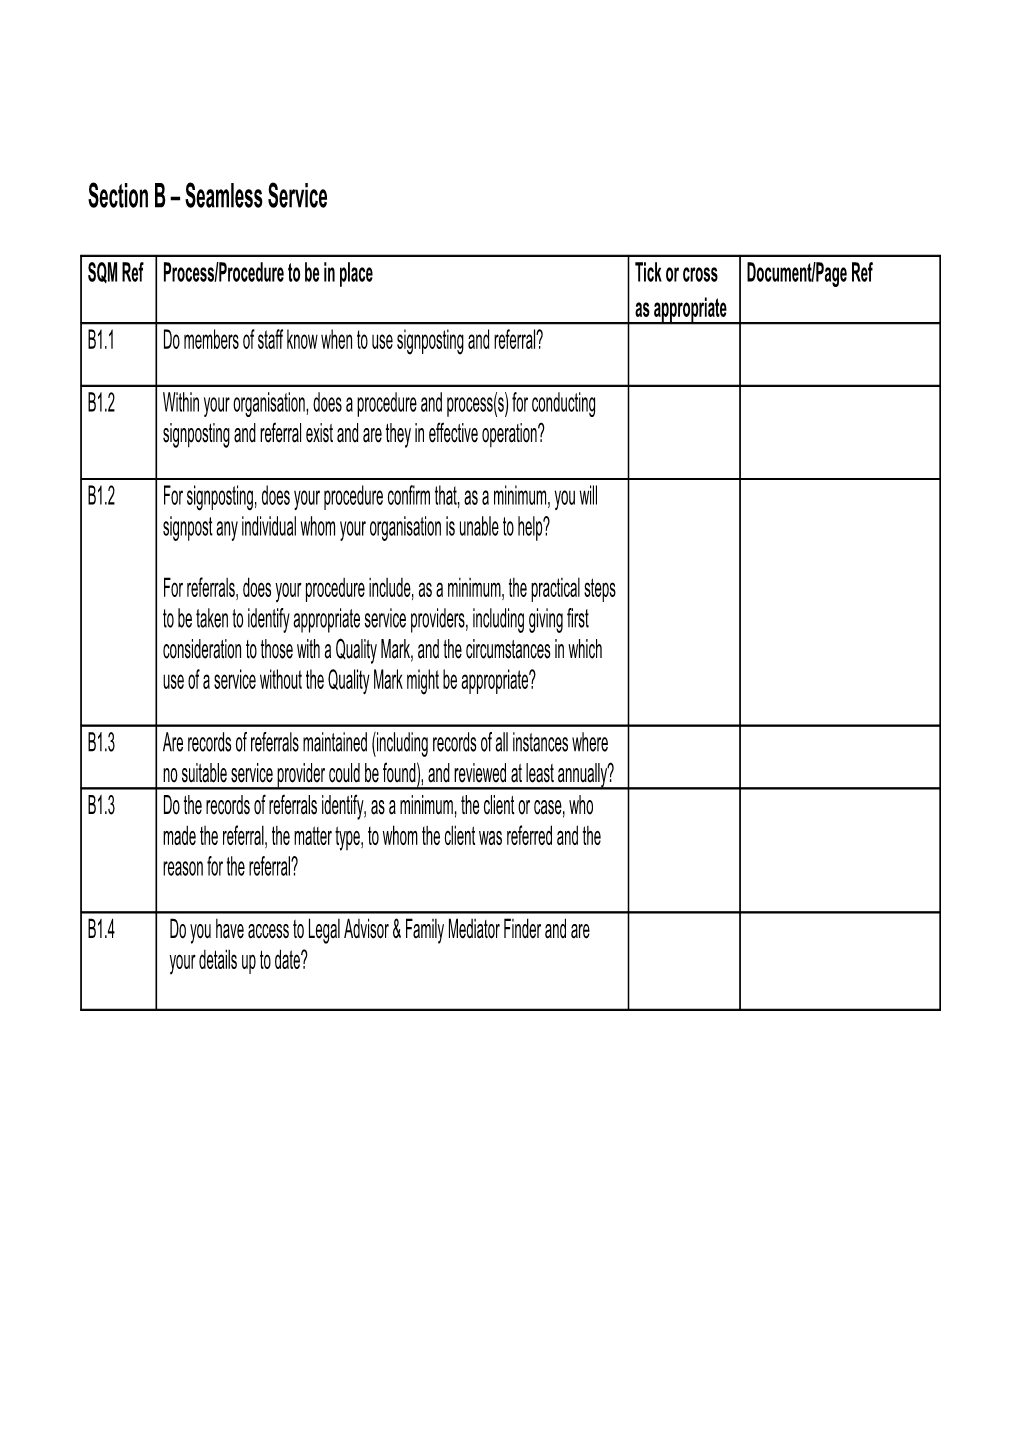 Specialist Quality Mark - Self Assessment Checklist